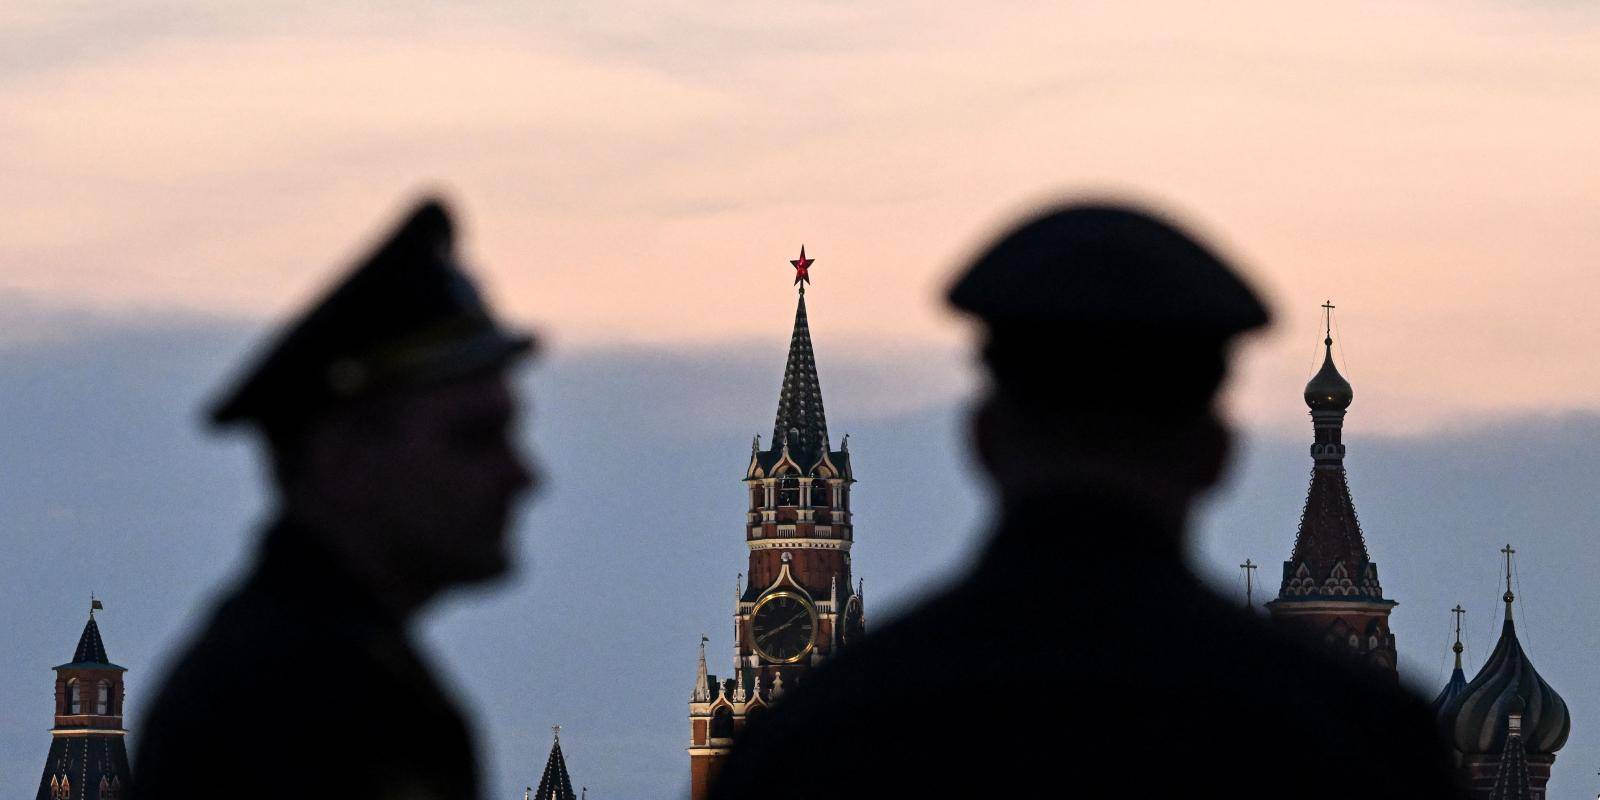 Two soldiers are shown in silhouette against the Kremlin’s Spasskaya tower and St Basil’s cathedral.